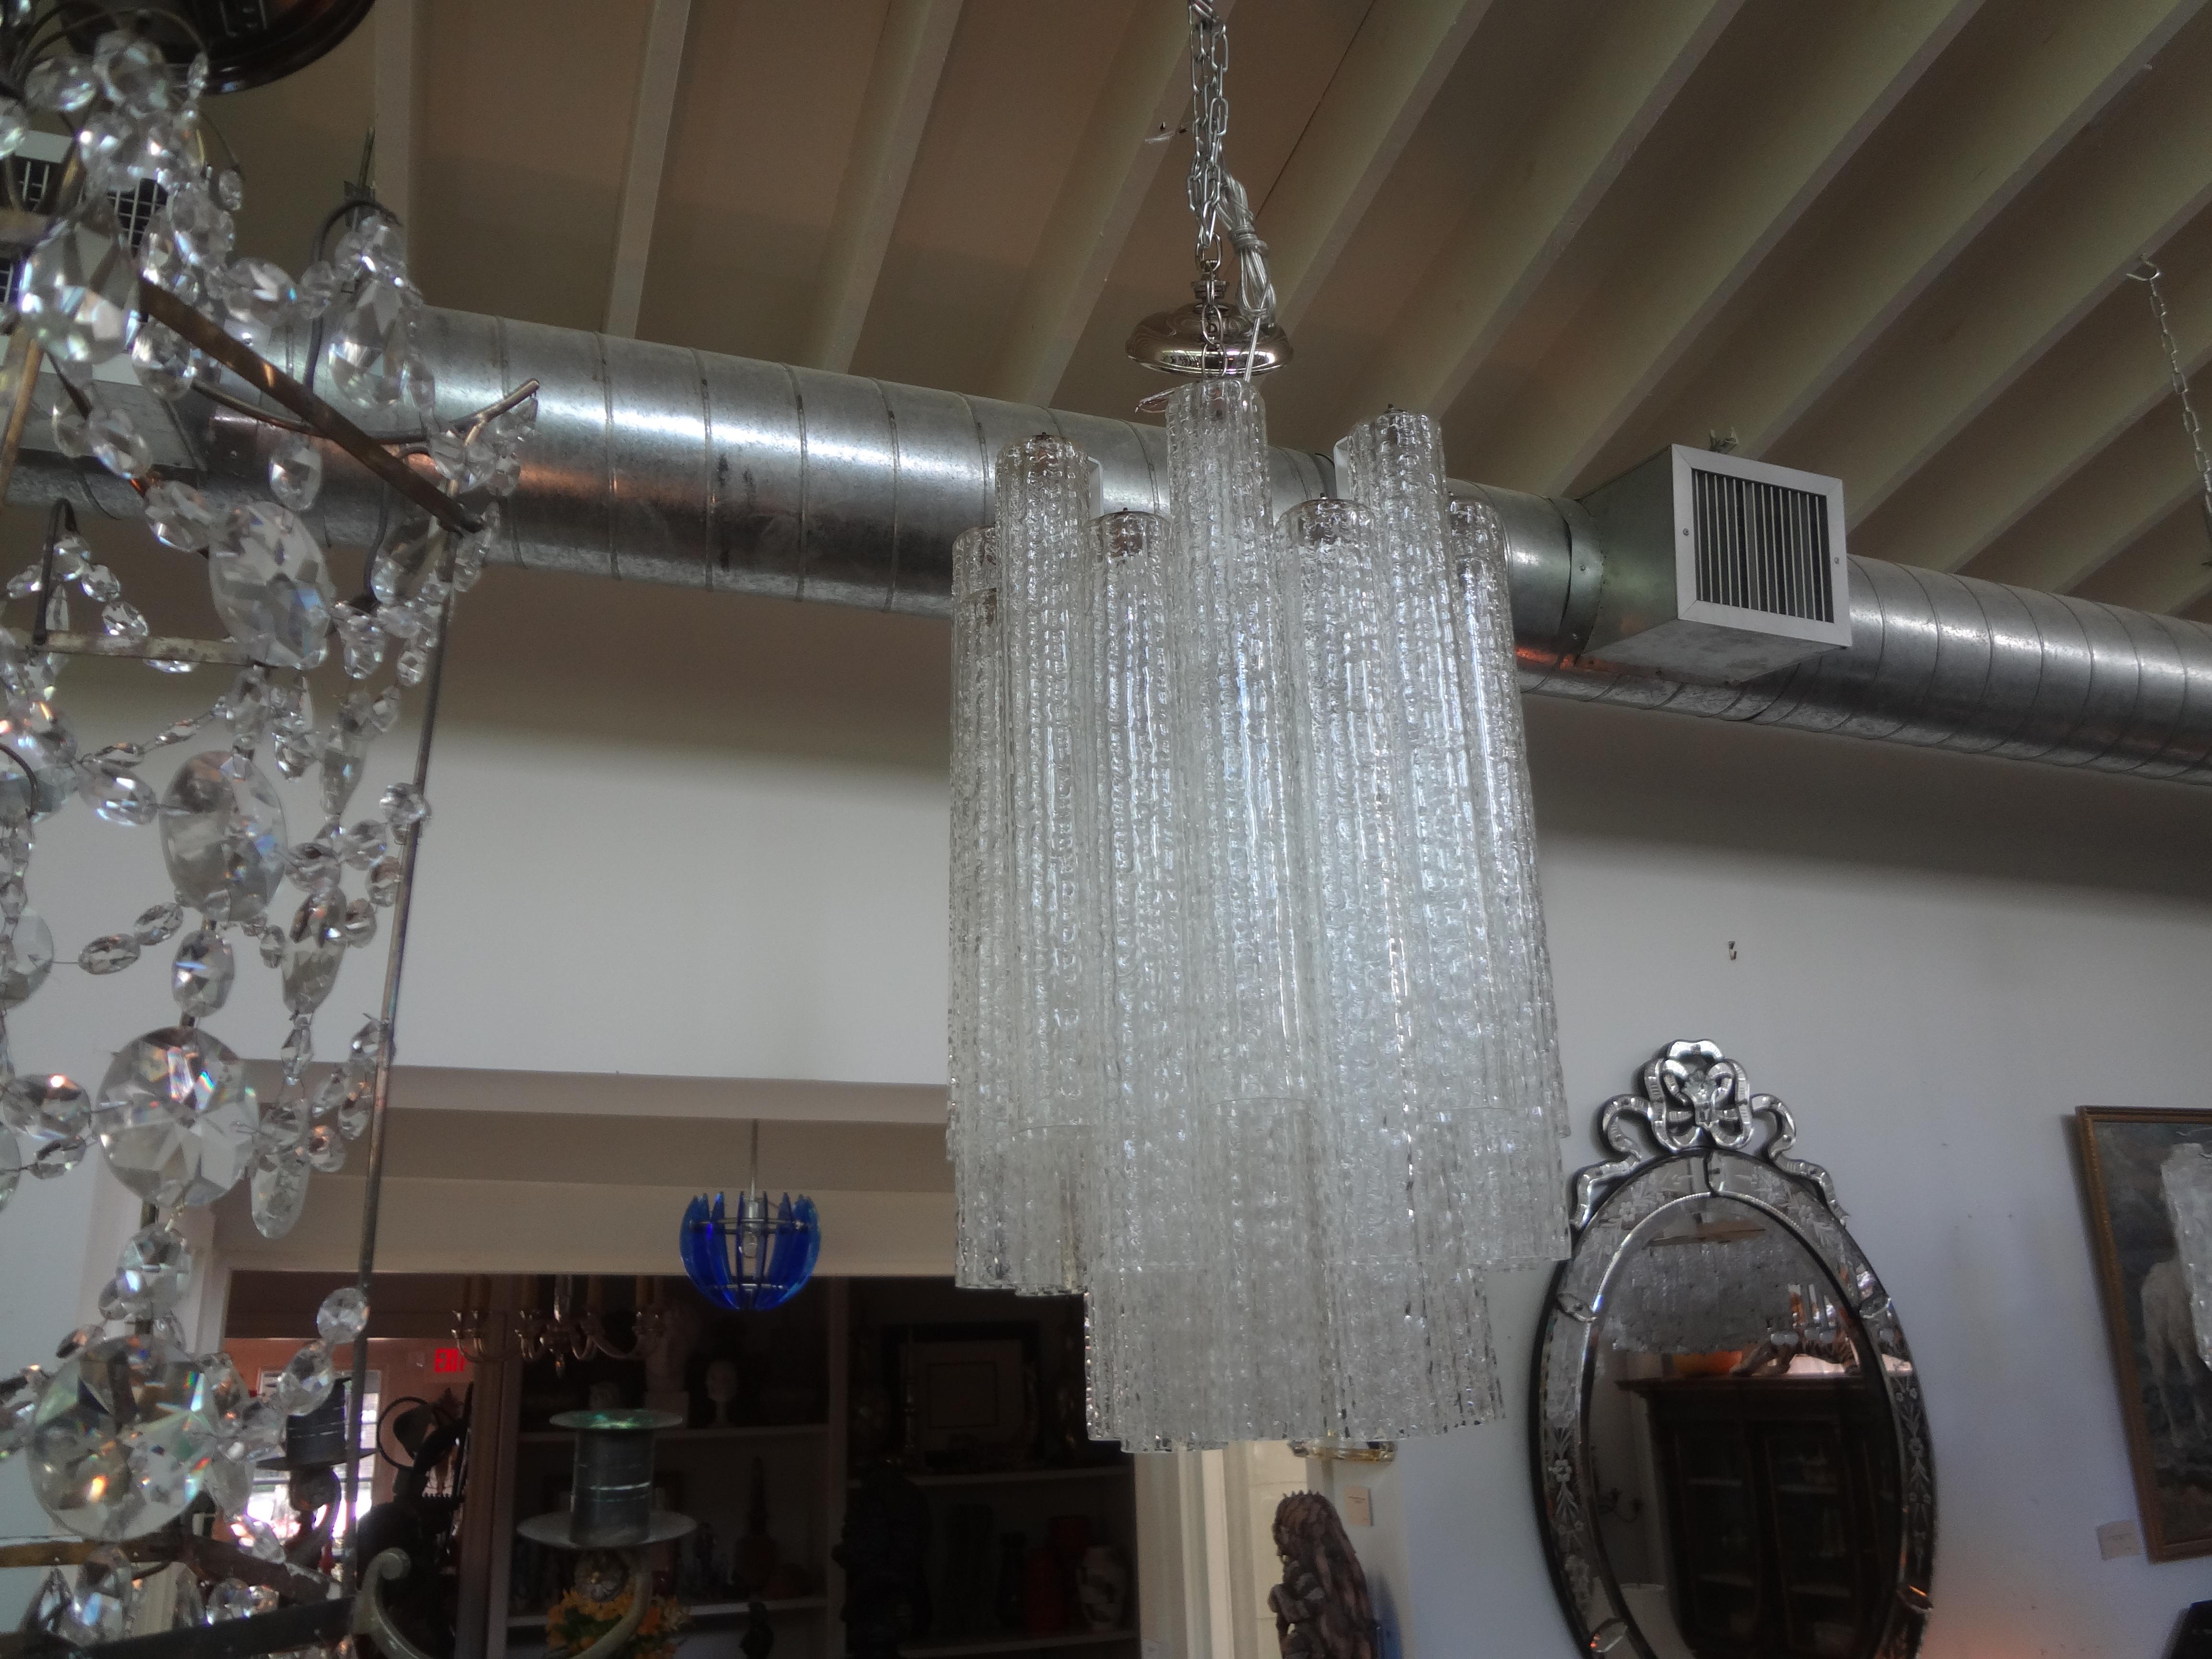 Murano glass chandelier by Toni Zuccheri For Venini.
Our unusual vintage Italian chandelier, pendant or lantern is comprised of 18 inch hand blown Murano glass tubes suspended from a chrome frame. This lovely Venini lantern has been newly wired